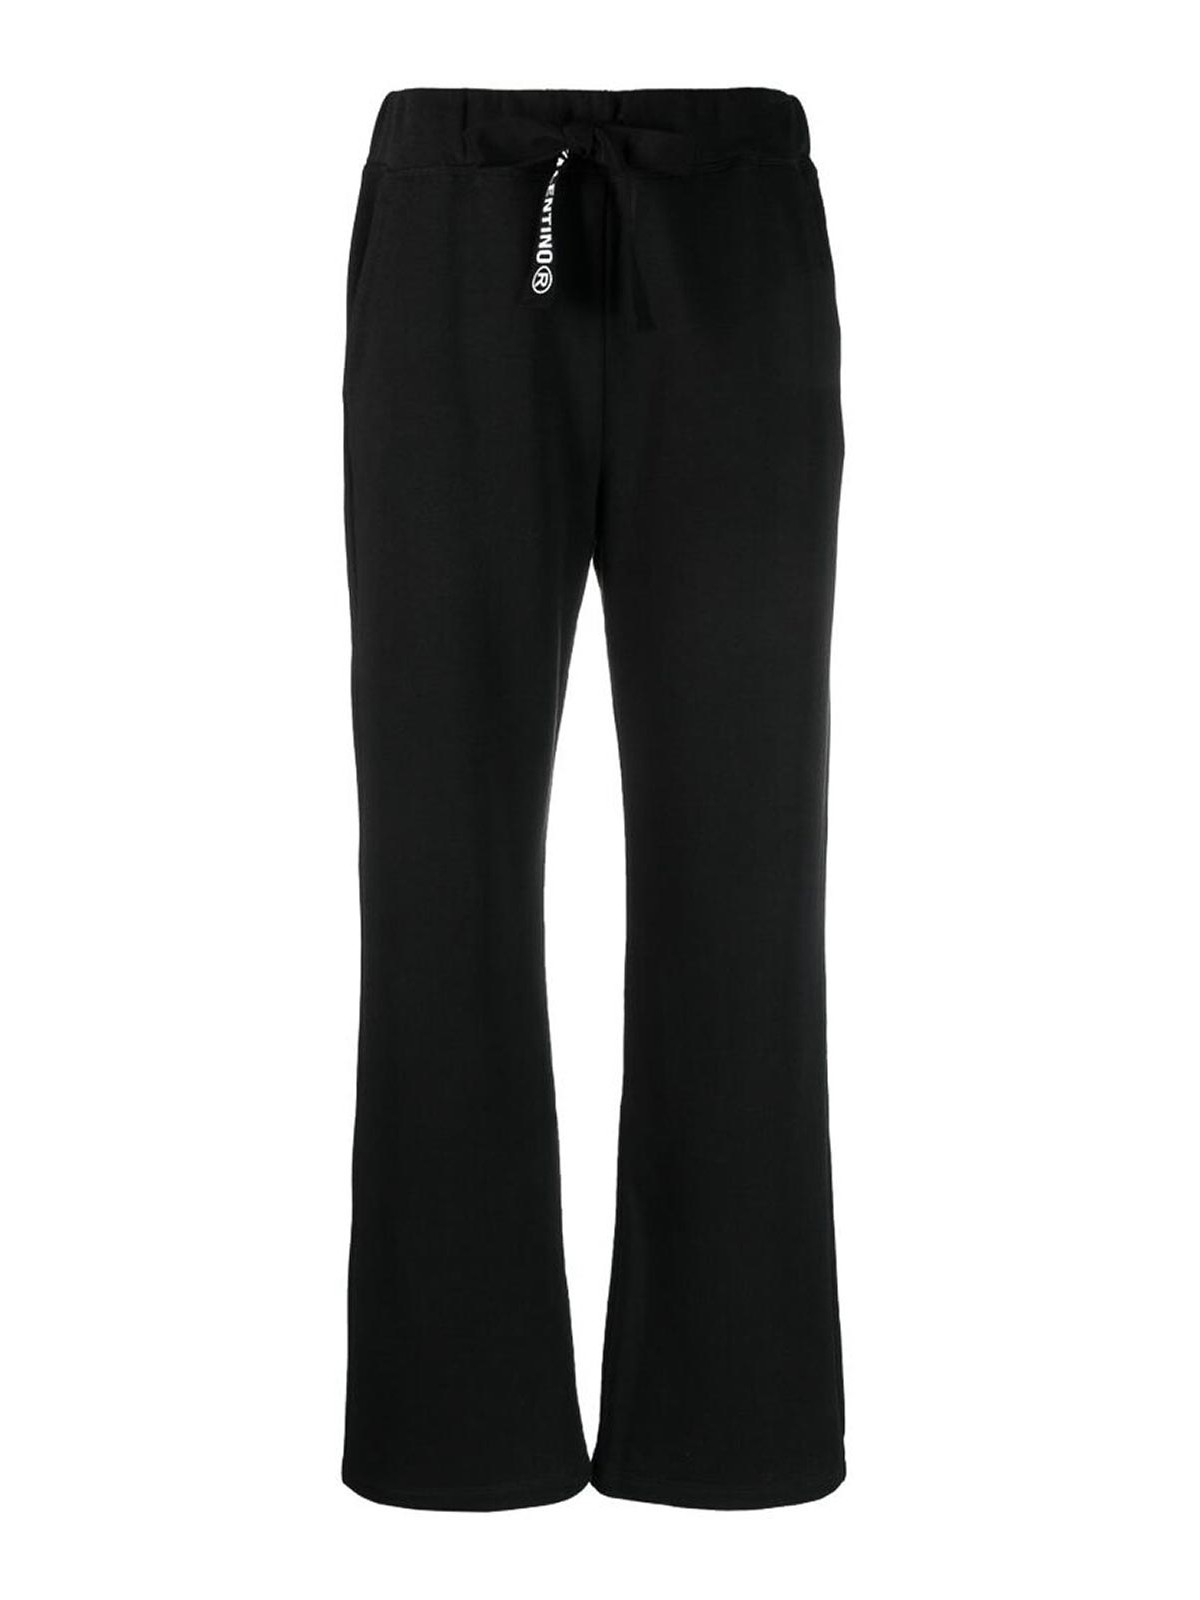 RED VALENTINO BLACK LOGO-TAPE TROUSERS